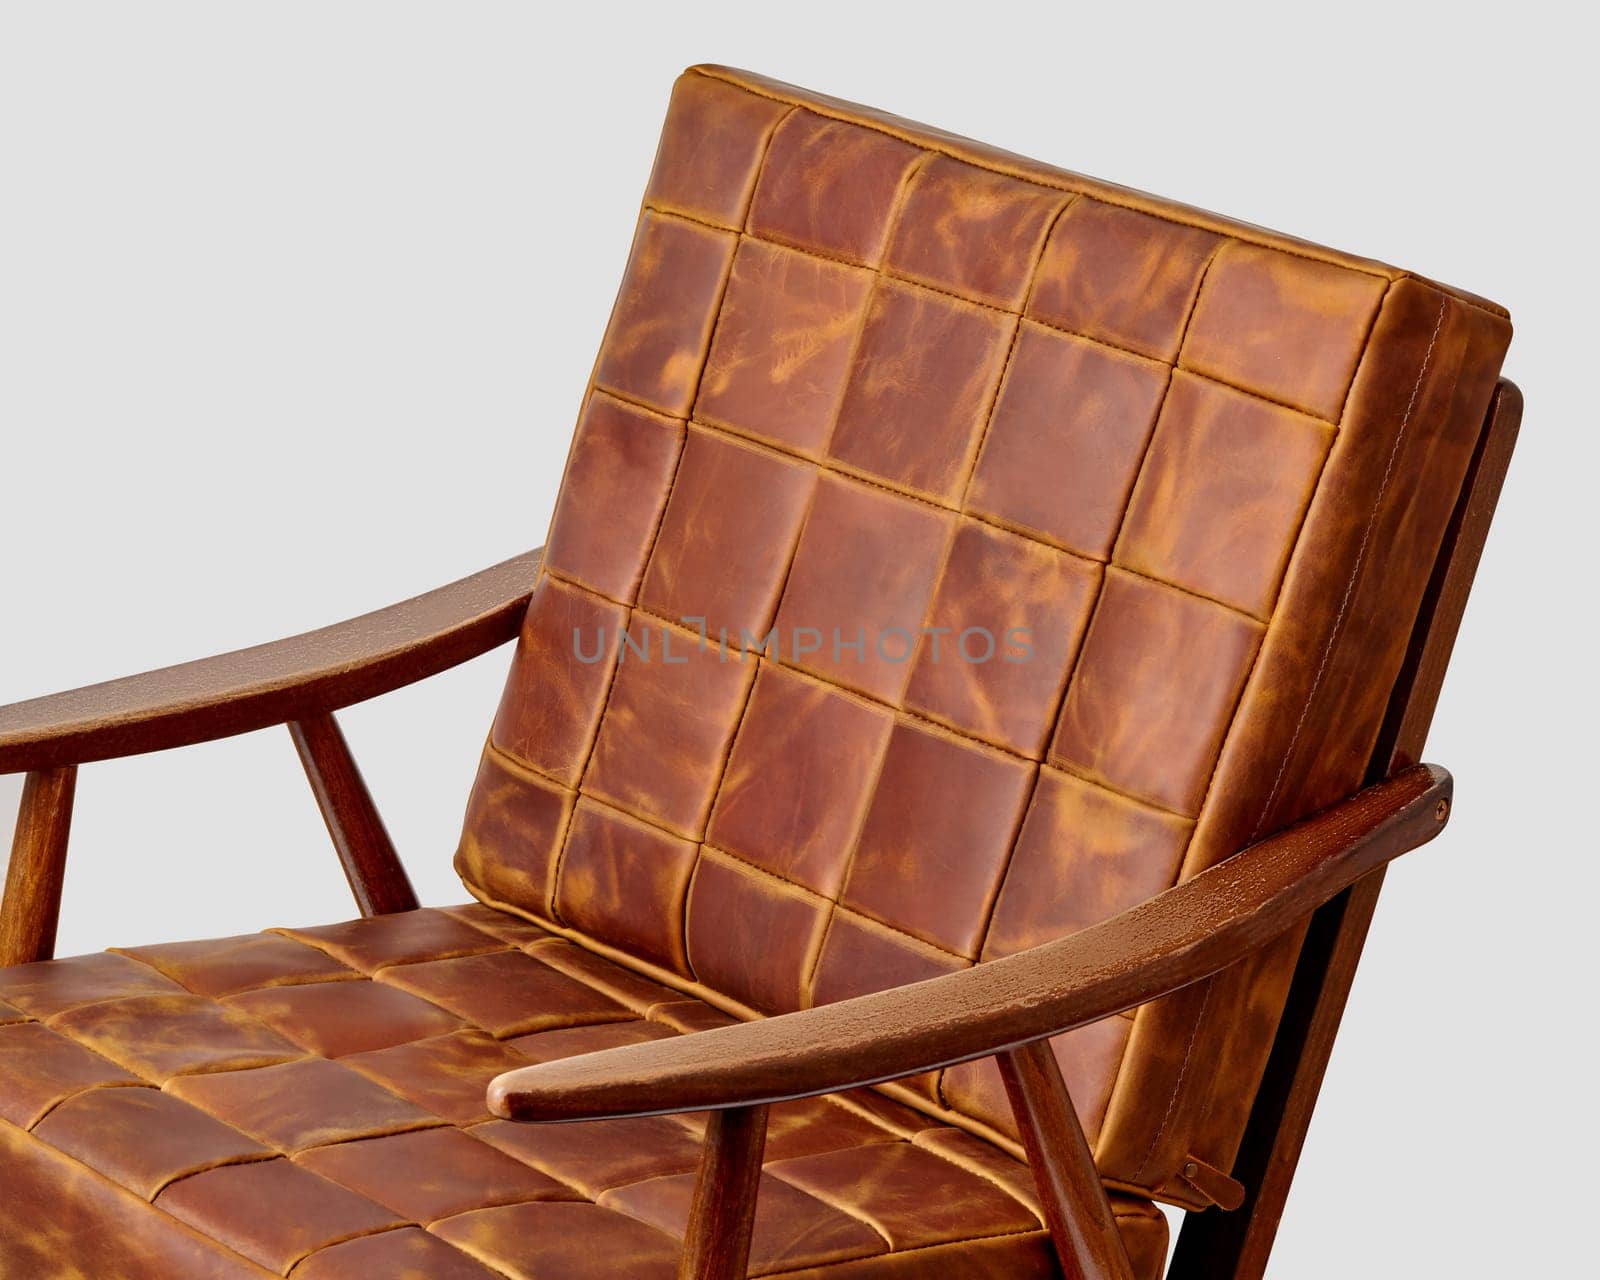 Armchair with patchwork brown leather cushions and wooden frame by nazarovsergey